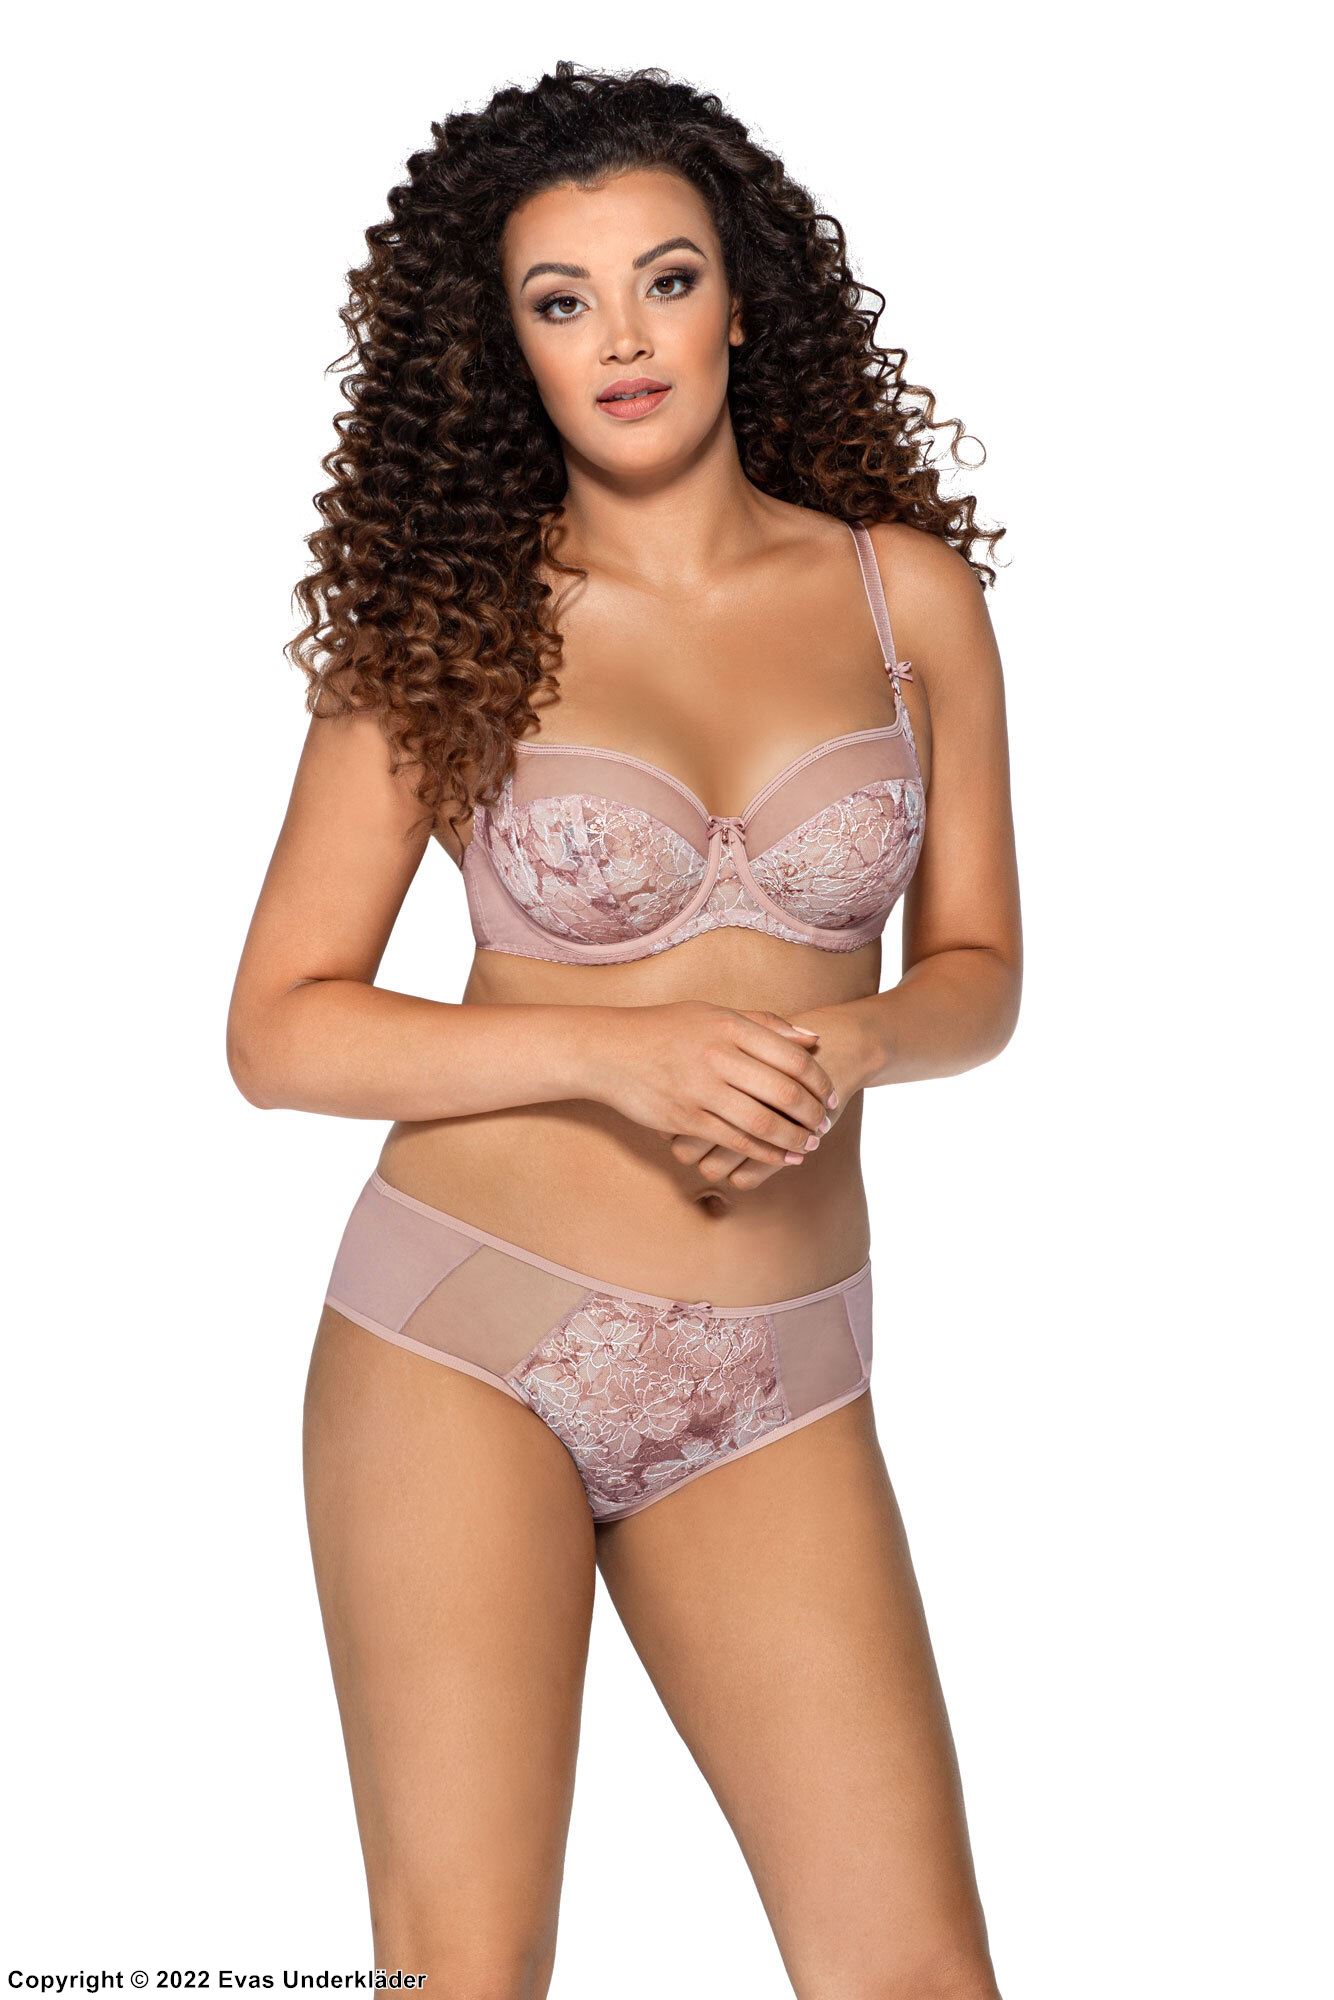 Romantic big cup bra, embroidery, sheer inlays, flowers, B to L-cup